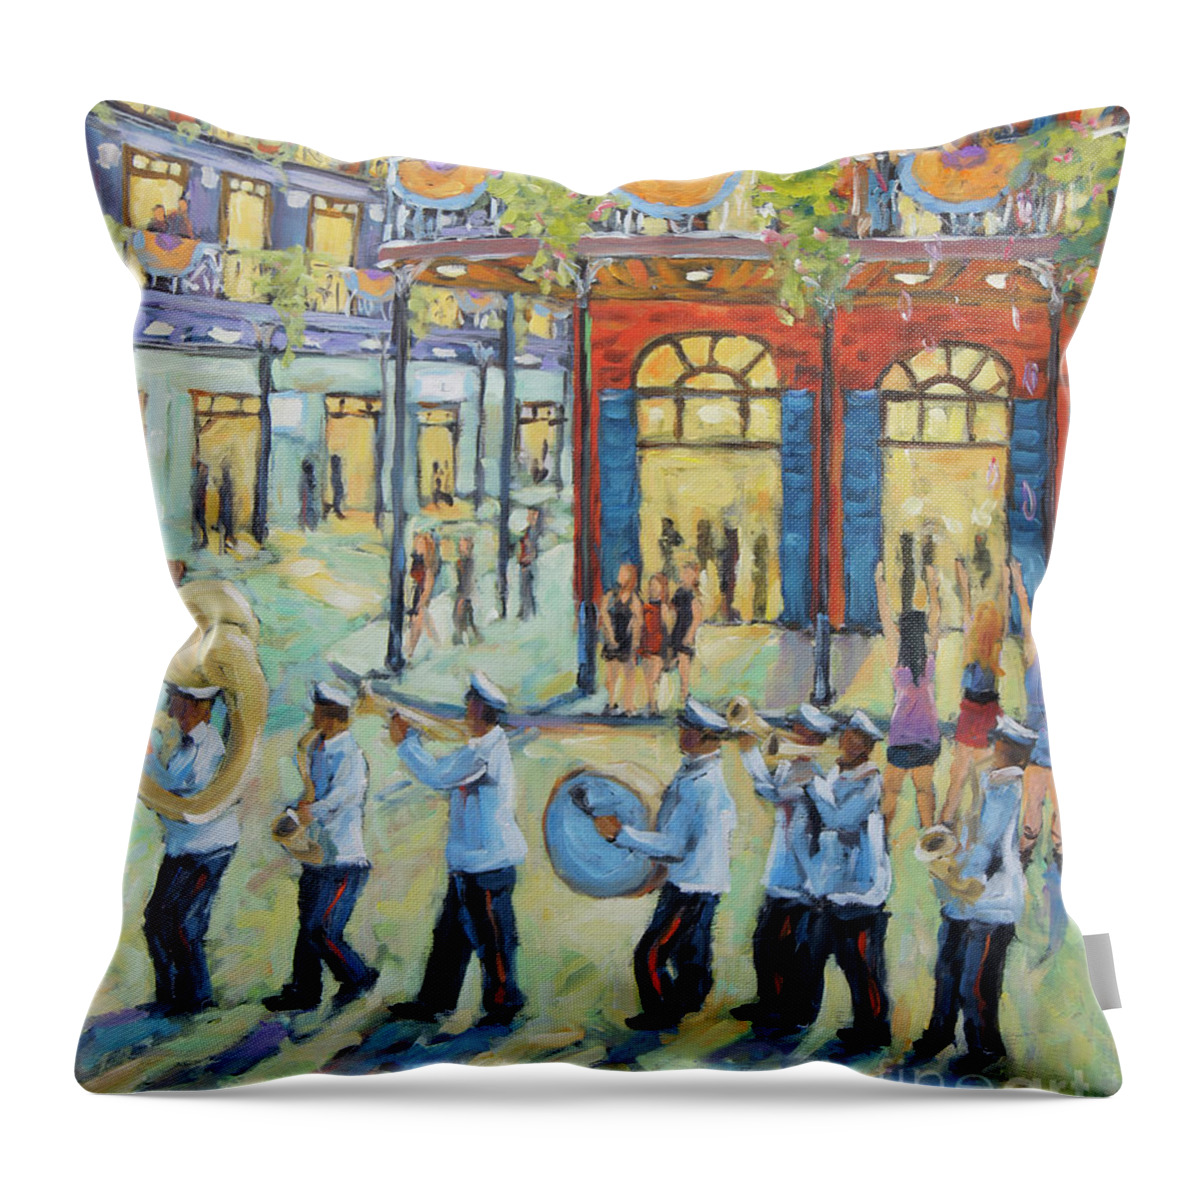 New Orleans Cityscape Scene Throw Pillow featuring the painting Mardi Gras in New Orleans by Richard T Pranke